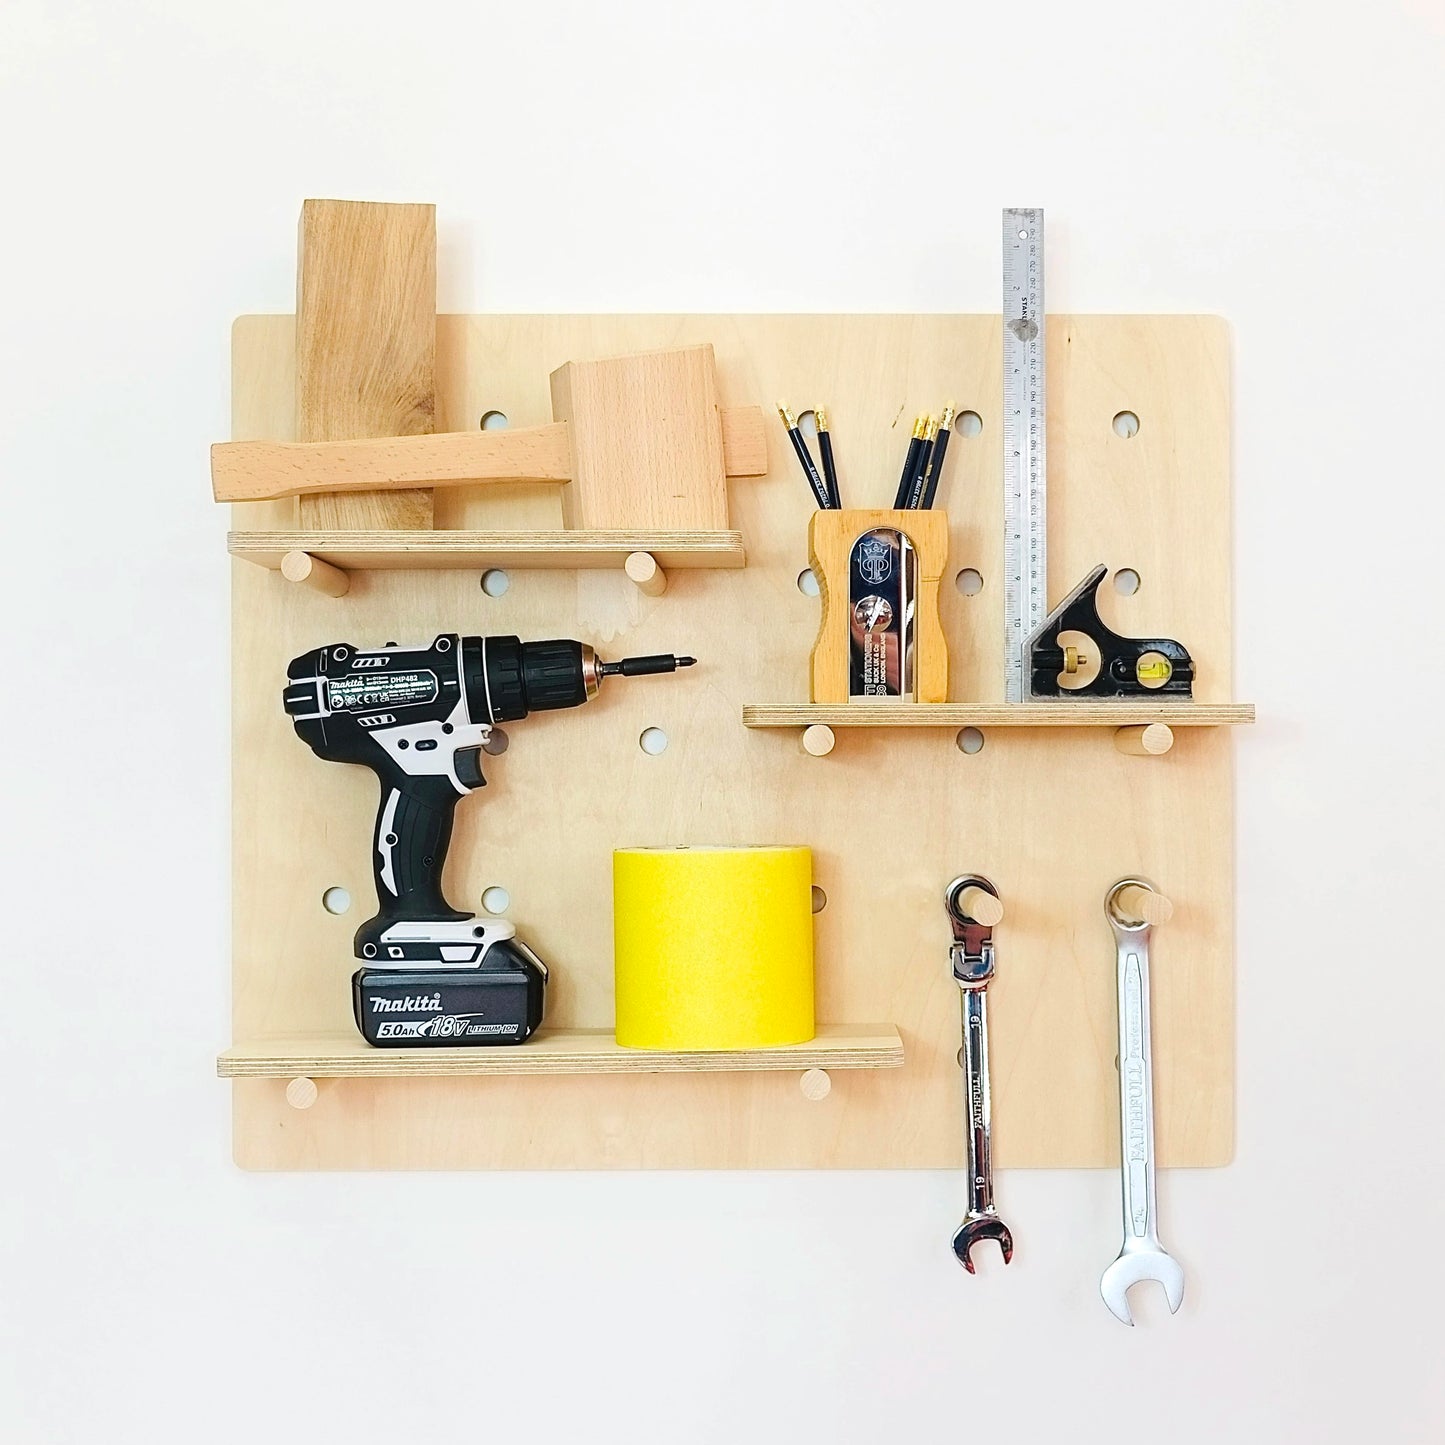 A medium pale wooden pegboard with many drilled holes, three shelves & pegs faces front on. Various woodworking tools are displayed on the board.